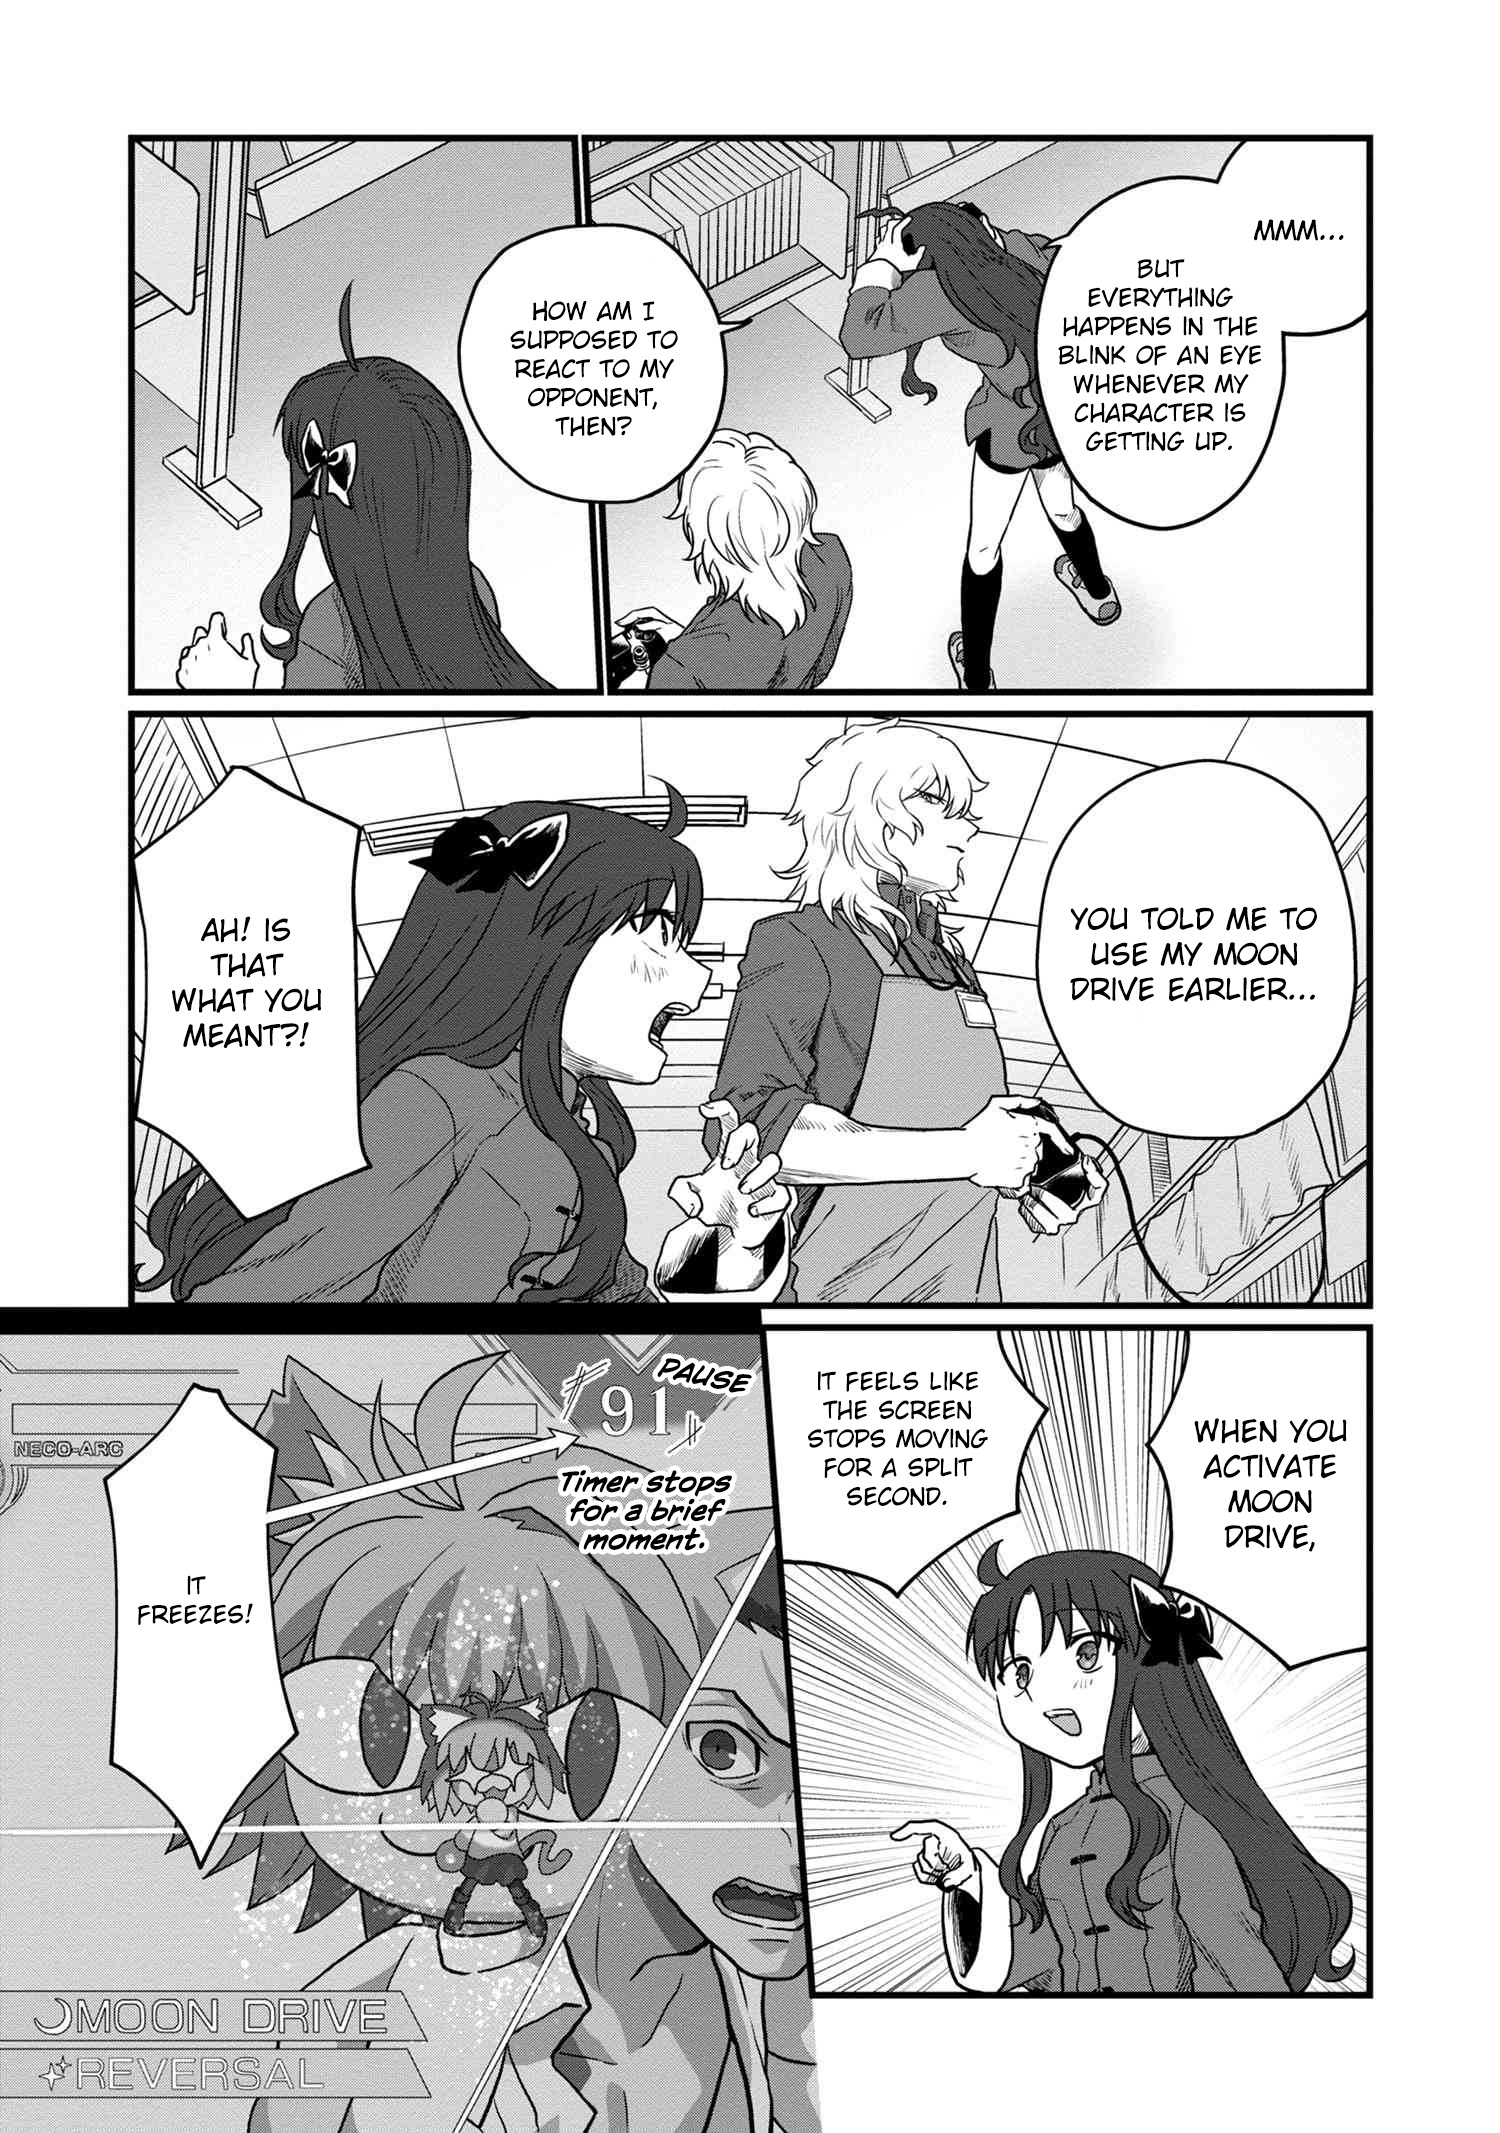 Melty Blood: Type Lumina Piece In Paradise - Page 2